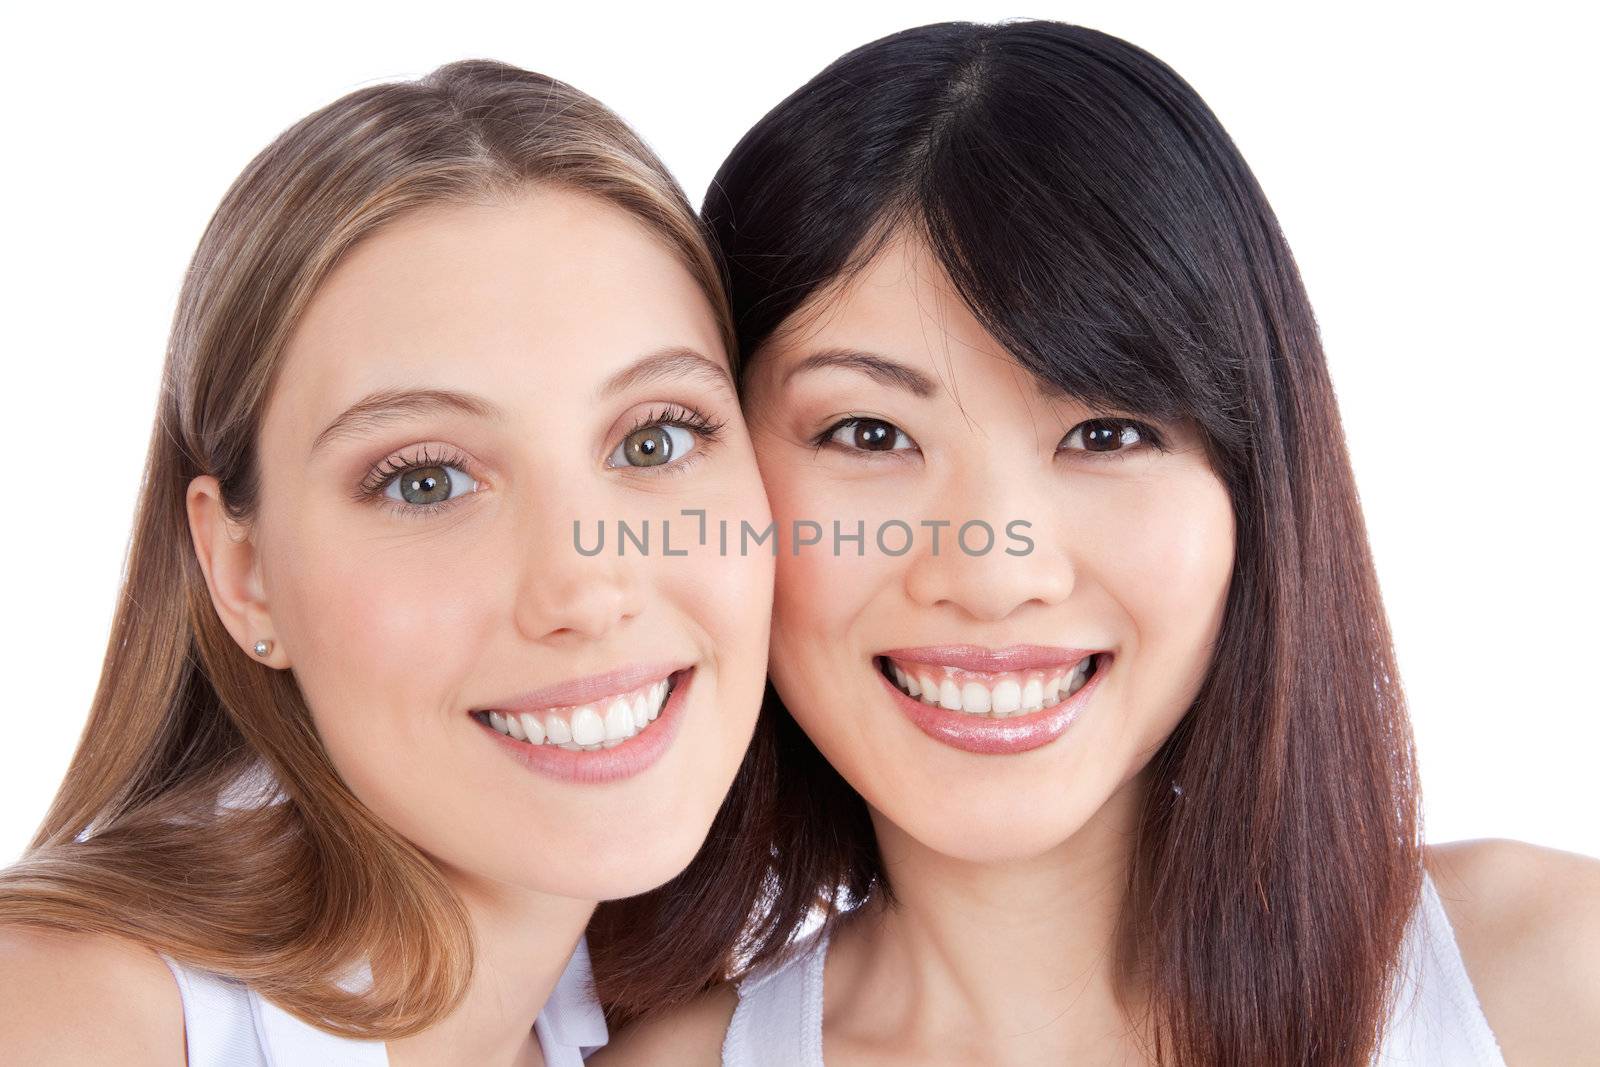 Portrait of two women isolated on white background.